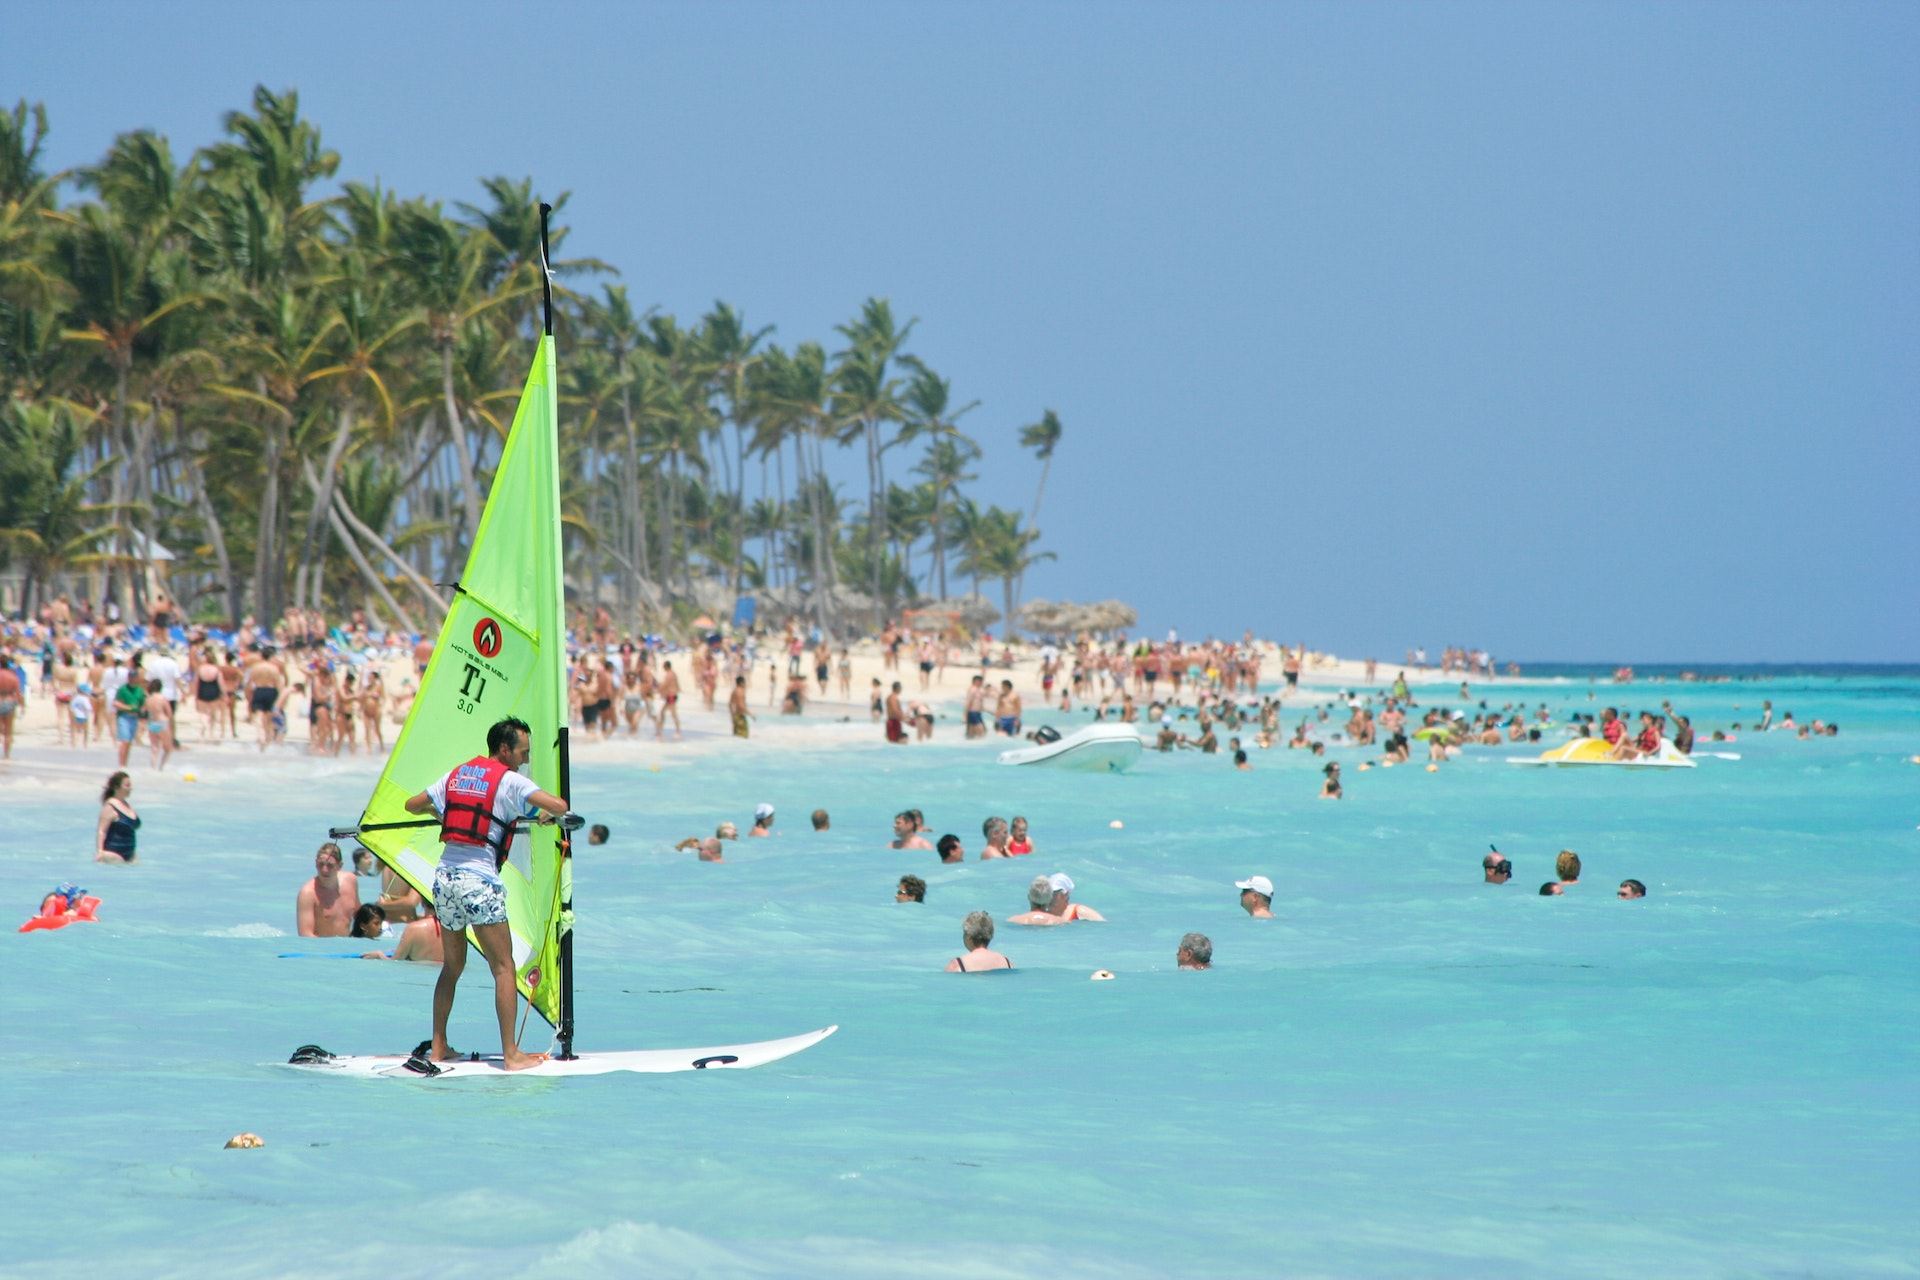 Tourist learning to windsurf at a busy Punta Cana beach